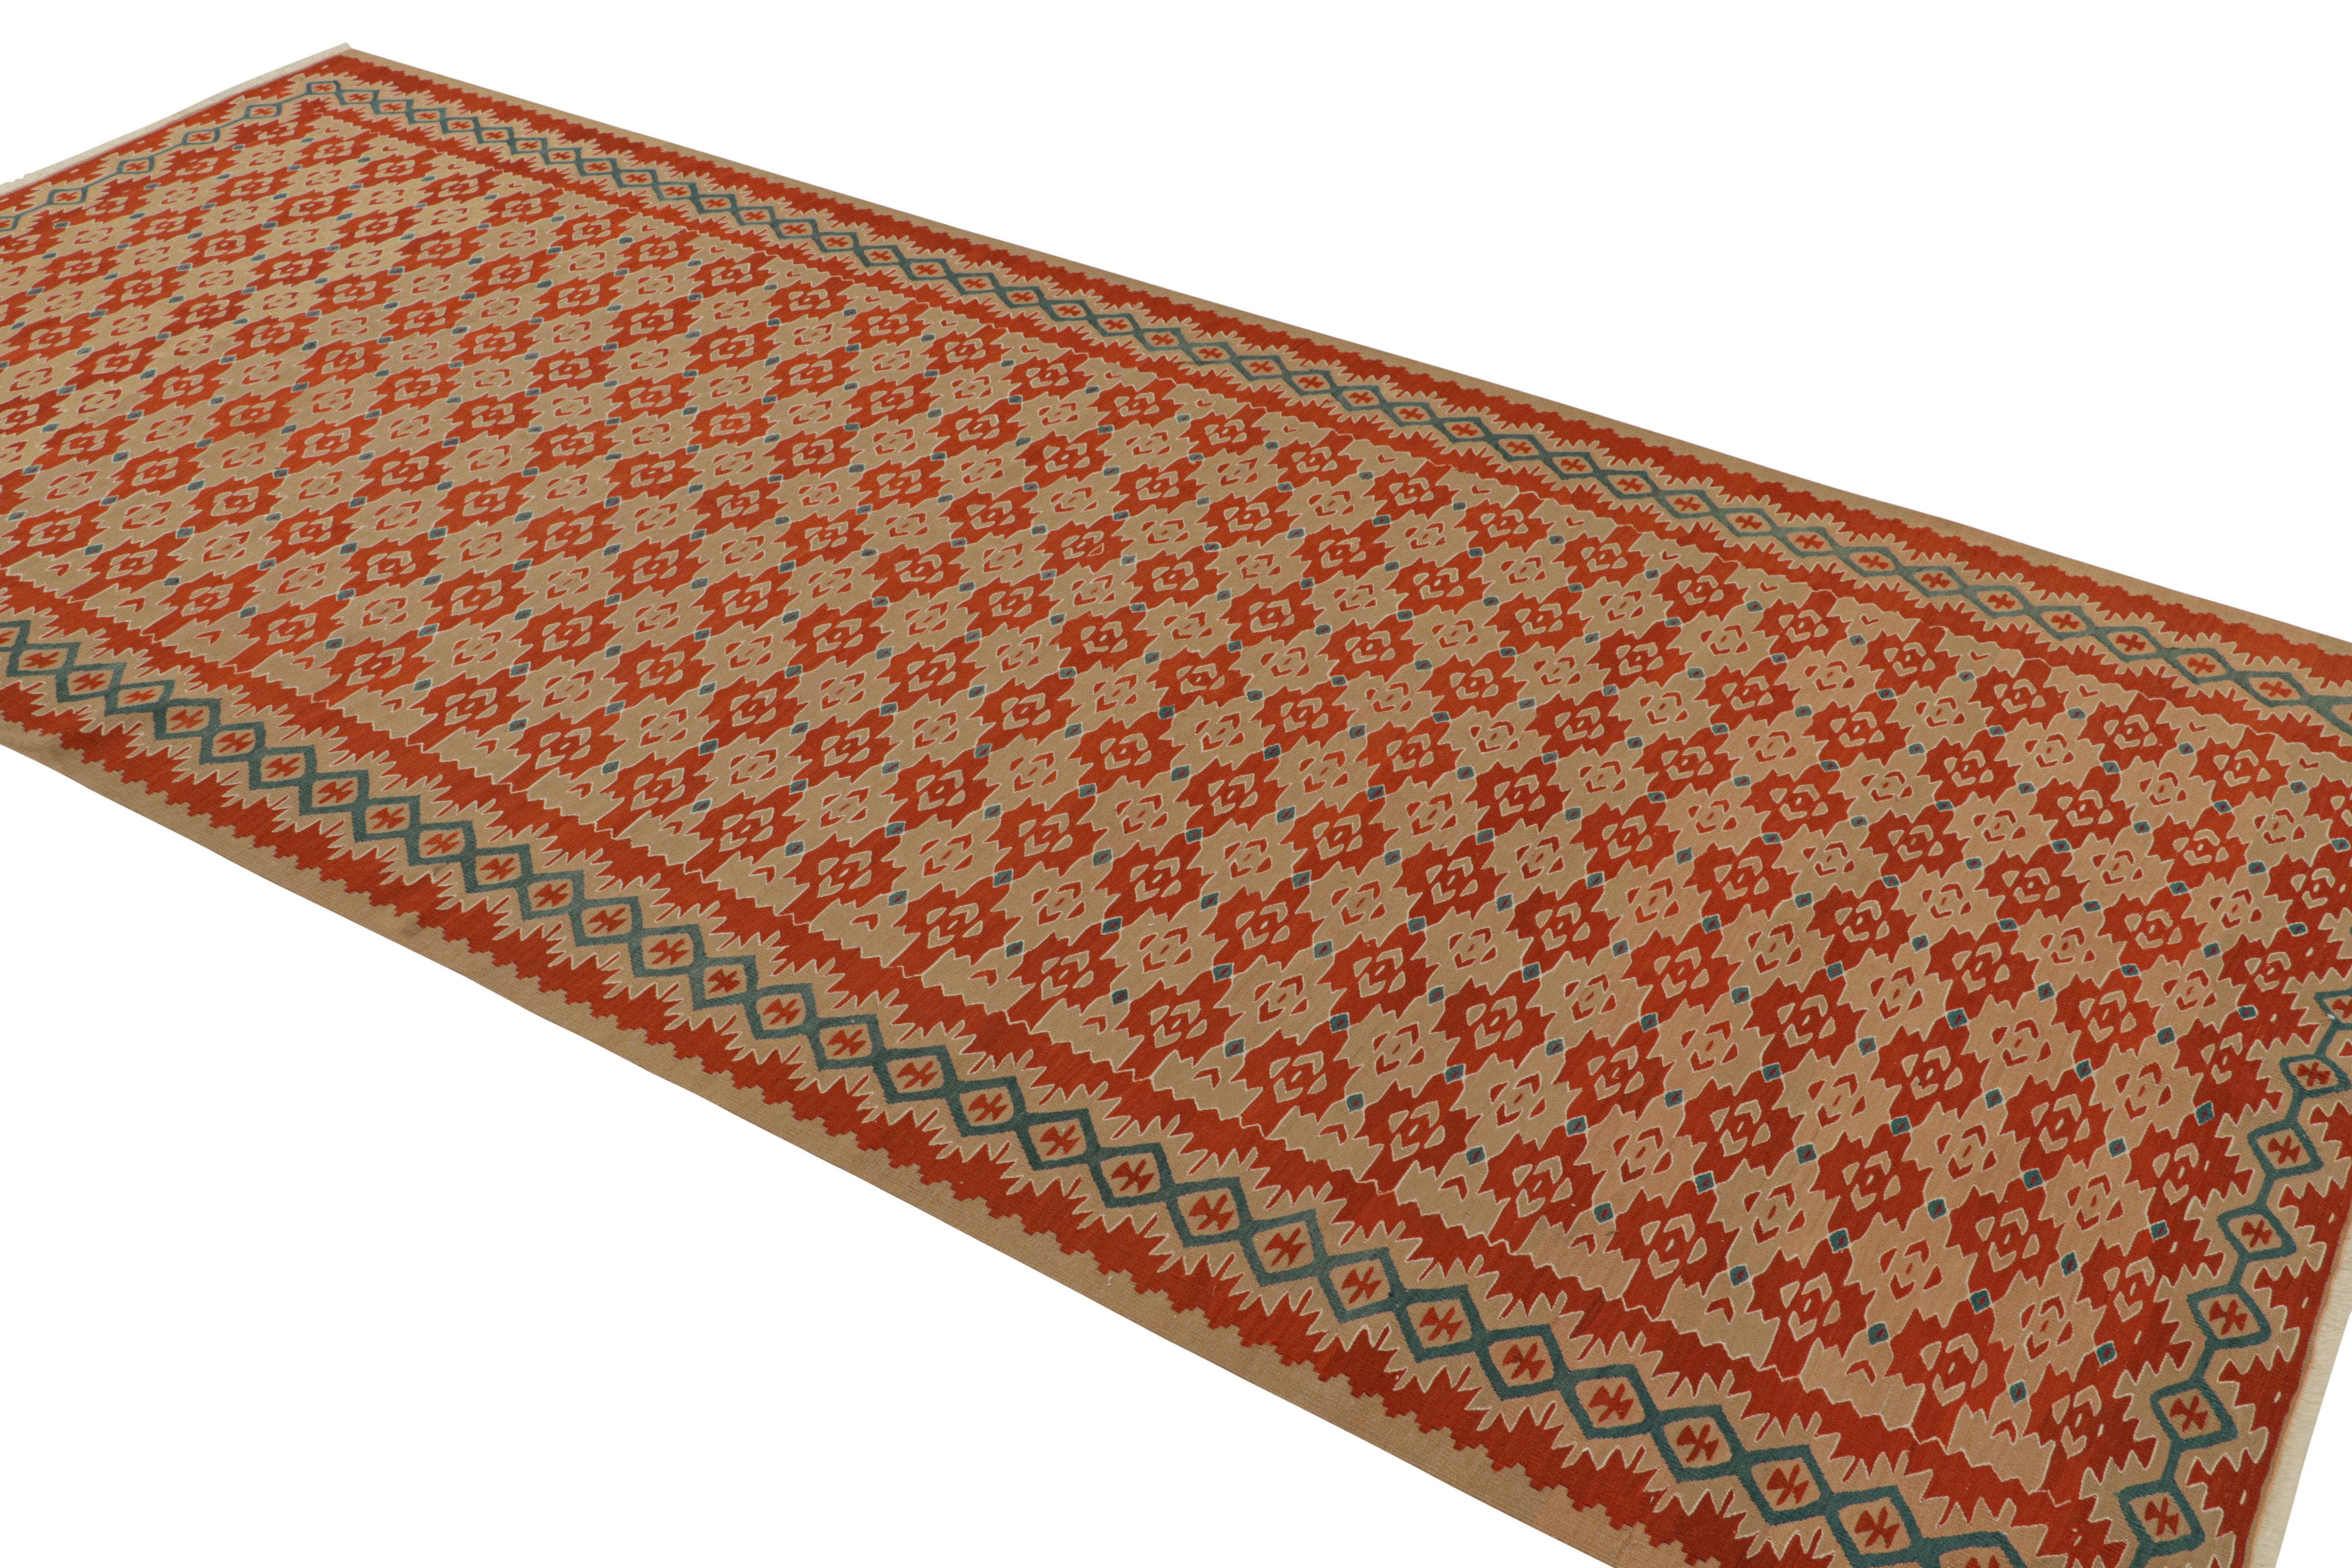 Hand-Woven Handwoven Vintage Rug in Orange Beige Geometric All-Over Pattern by Rug & Kilim For Sale